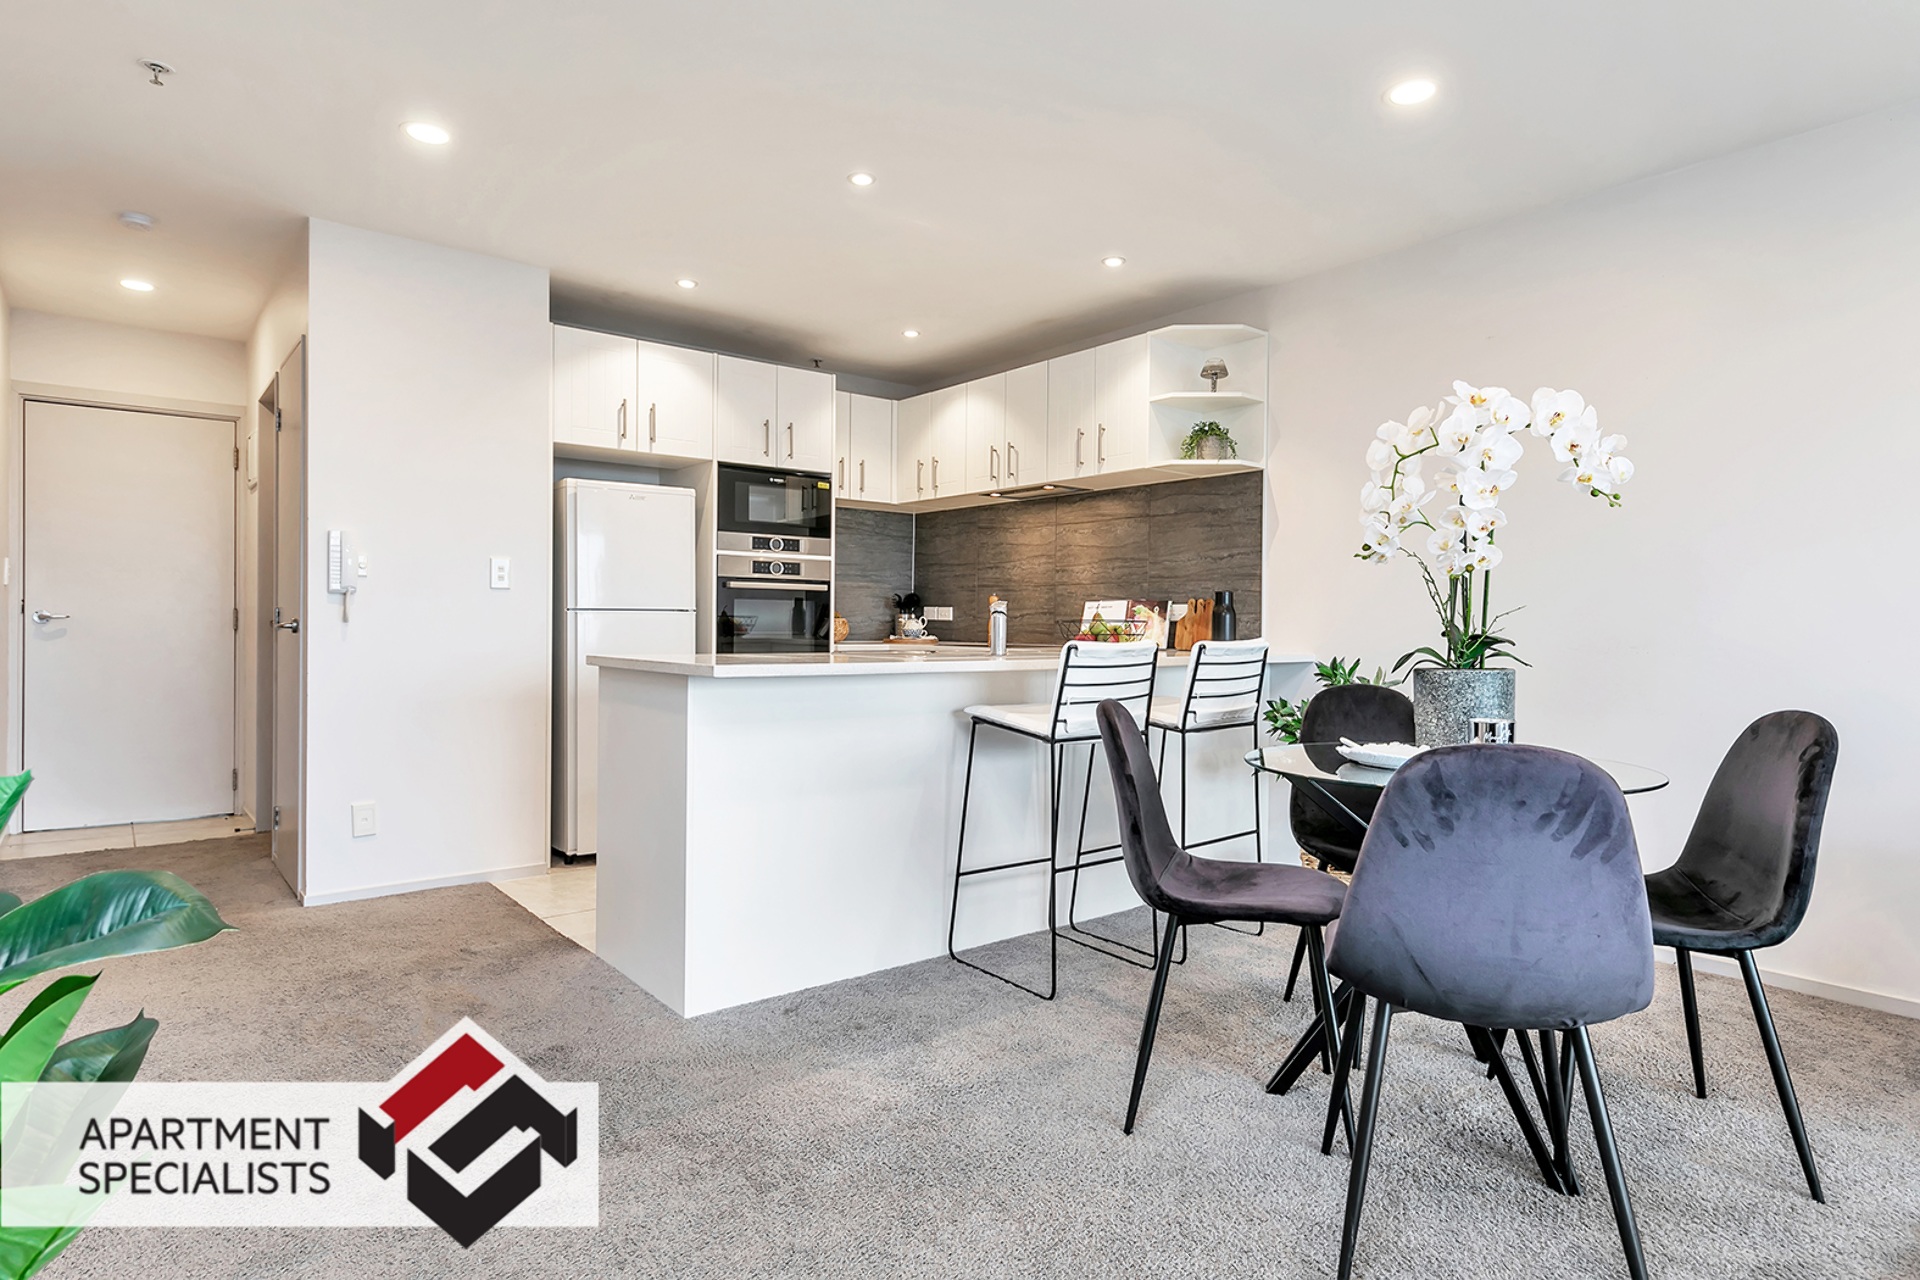 6 | 10 Ruskin Street, Parnell | Apartment Specialists